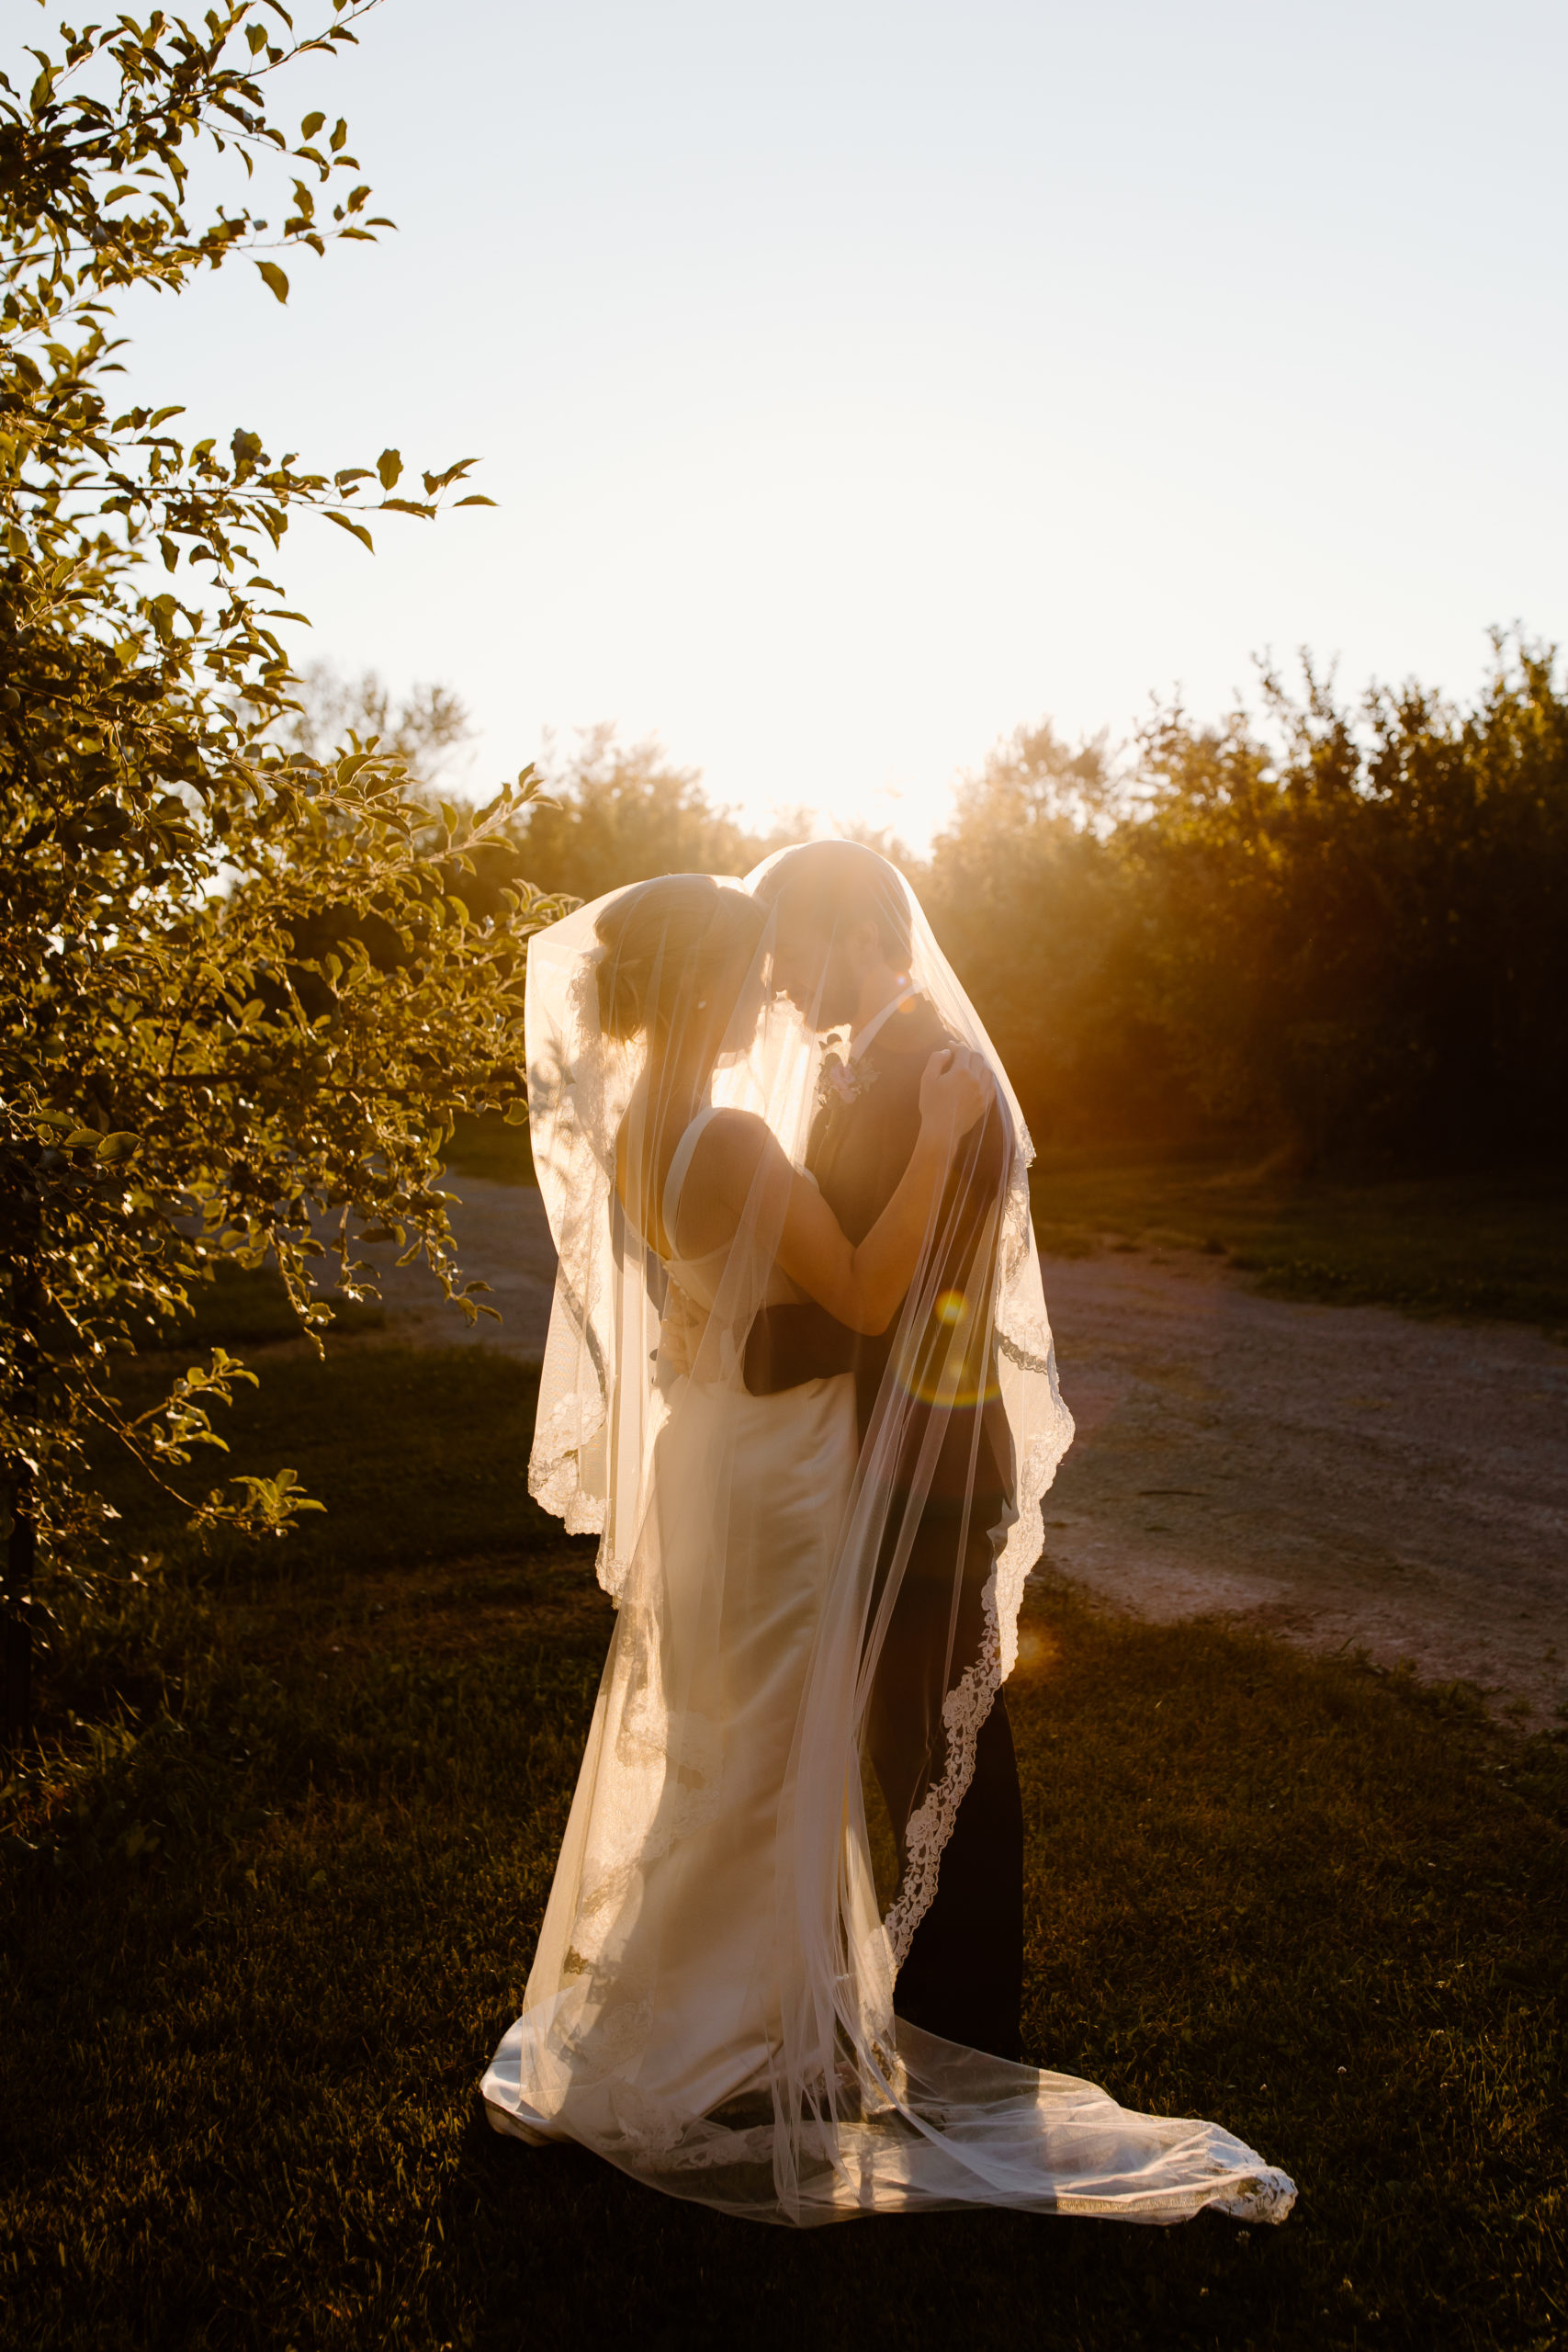 How to Plan Your Wedding Timeline | Golden Hour Portraits